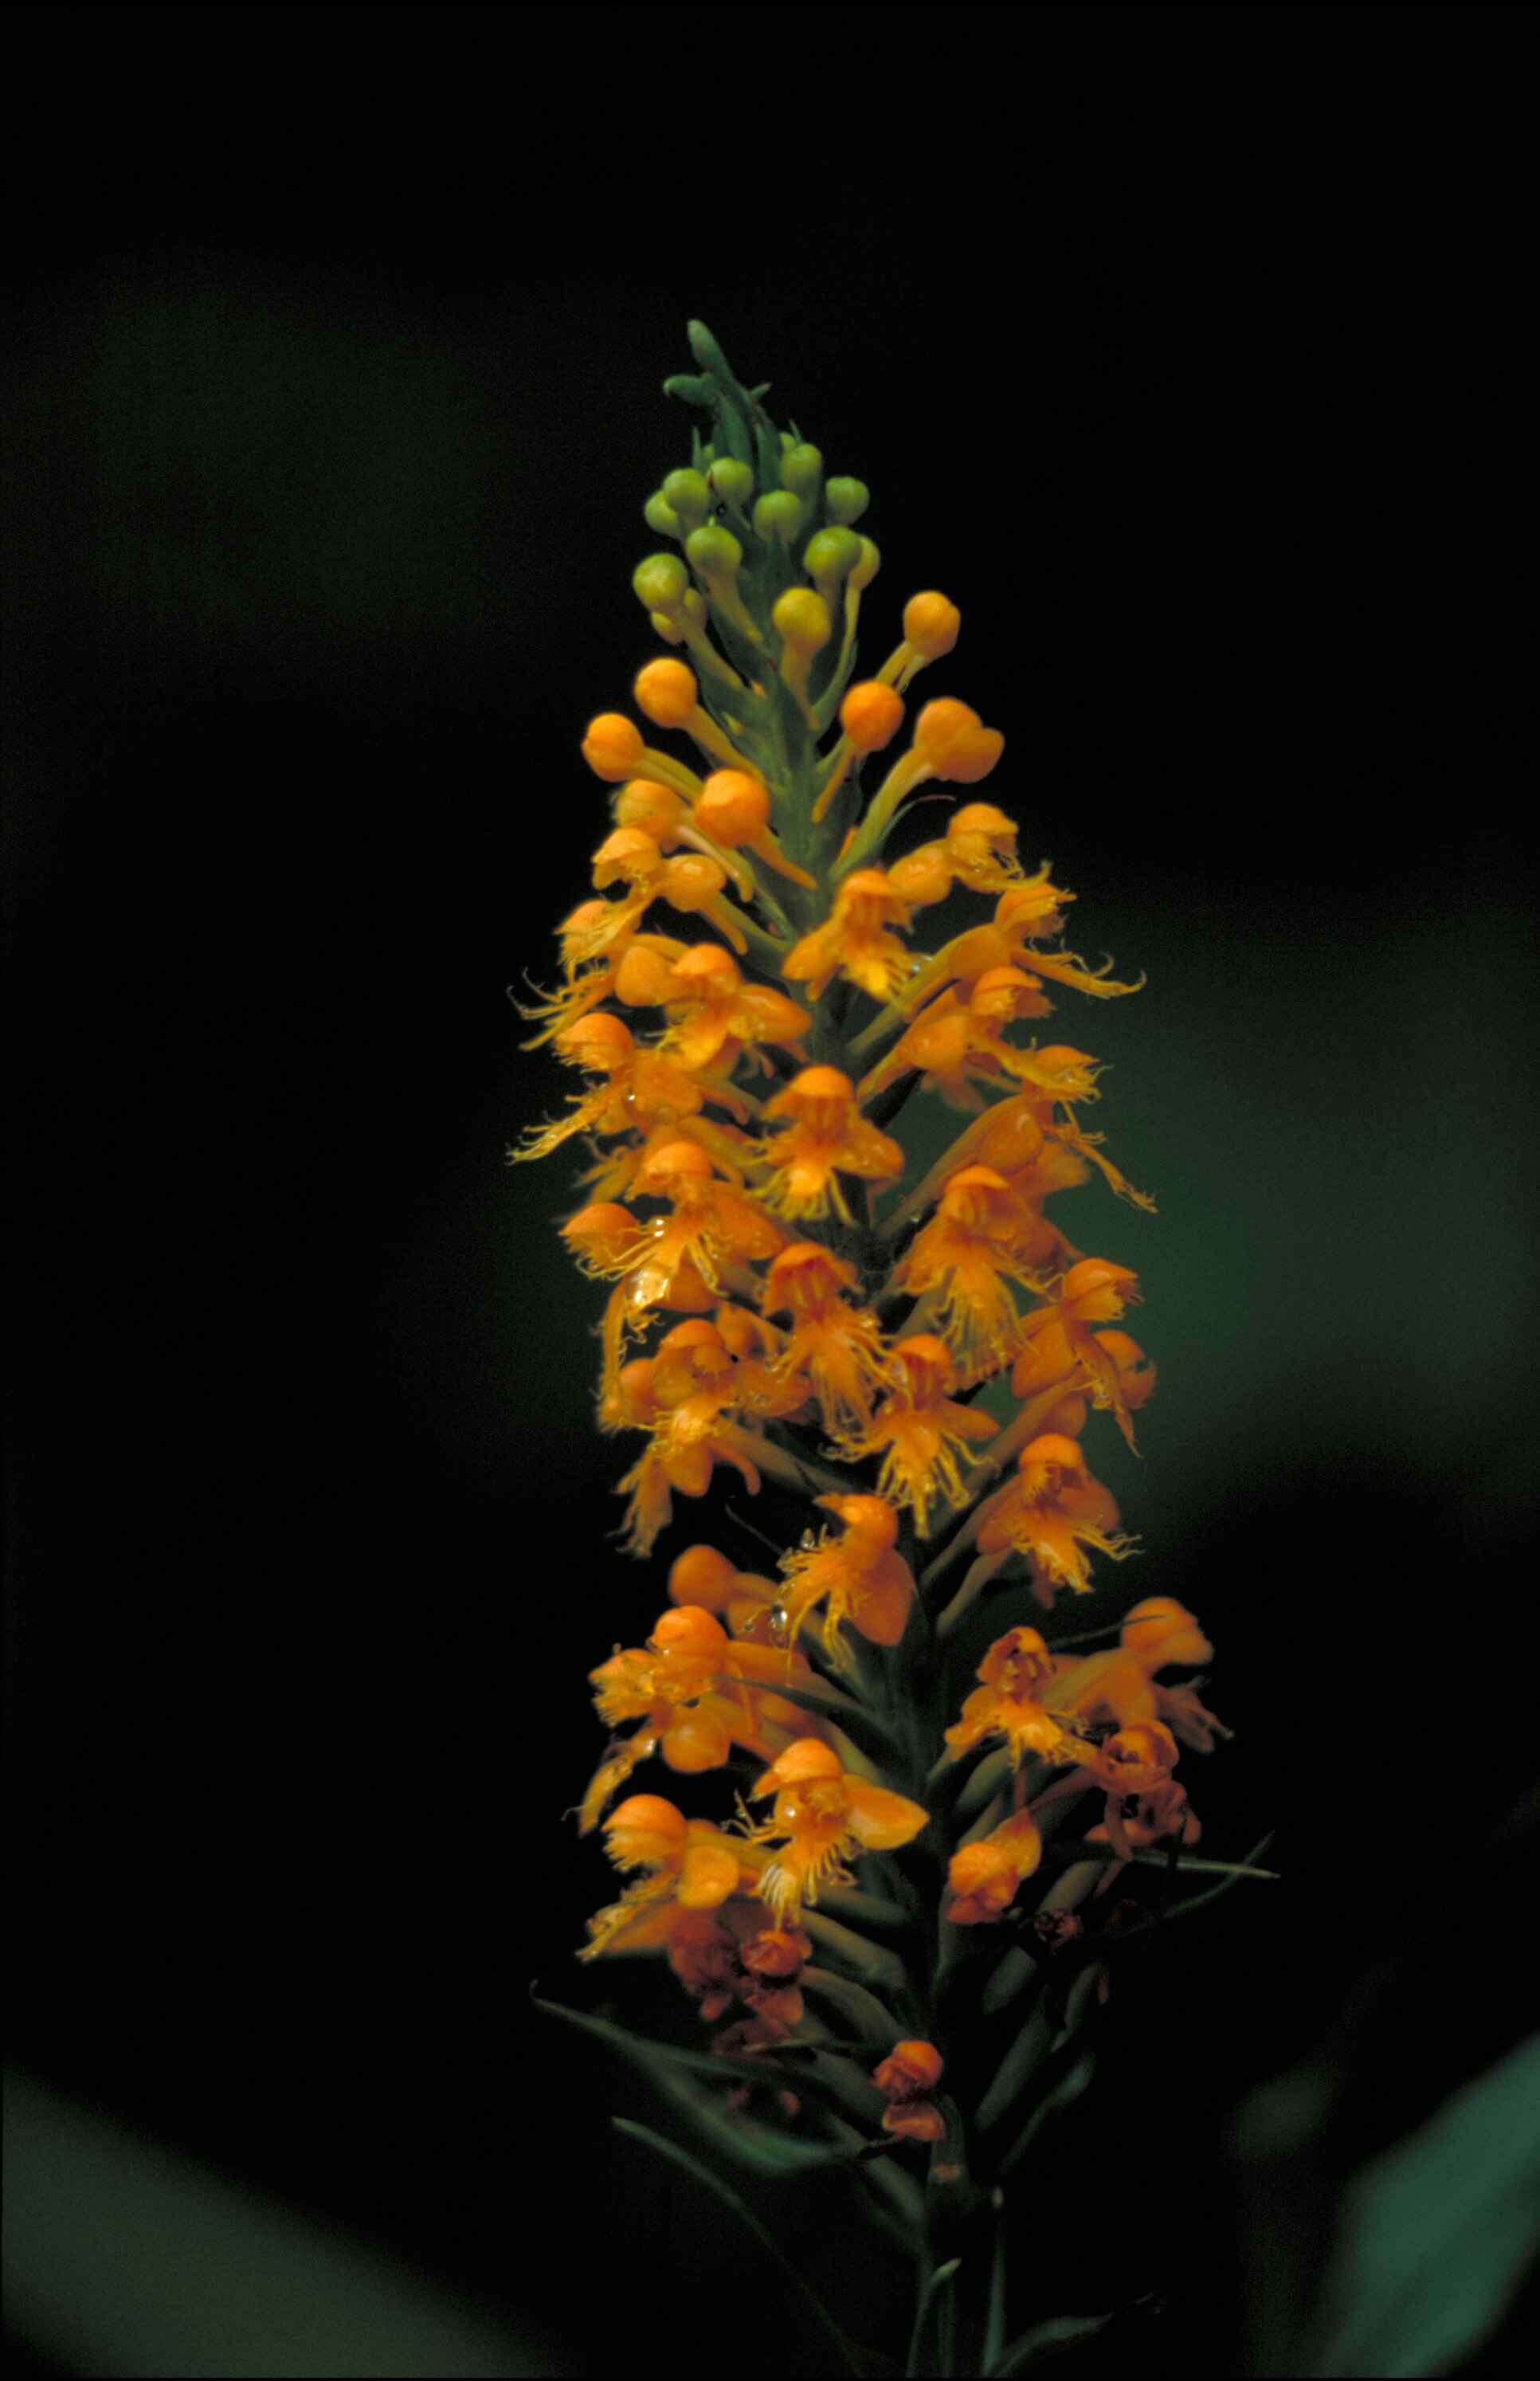 Image of Crested Yellow Orchid